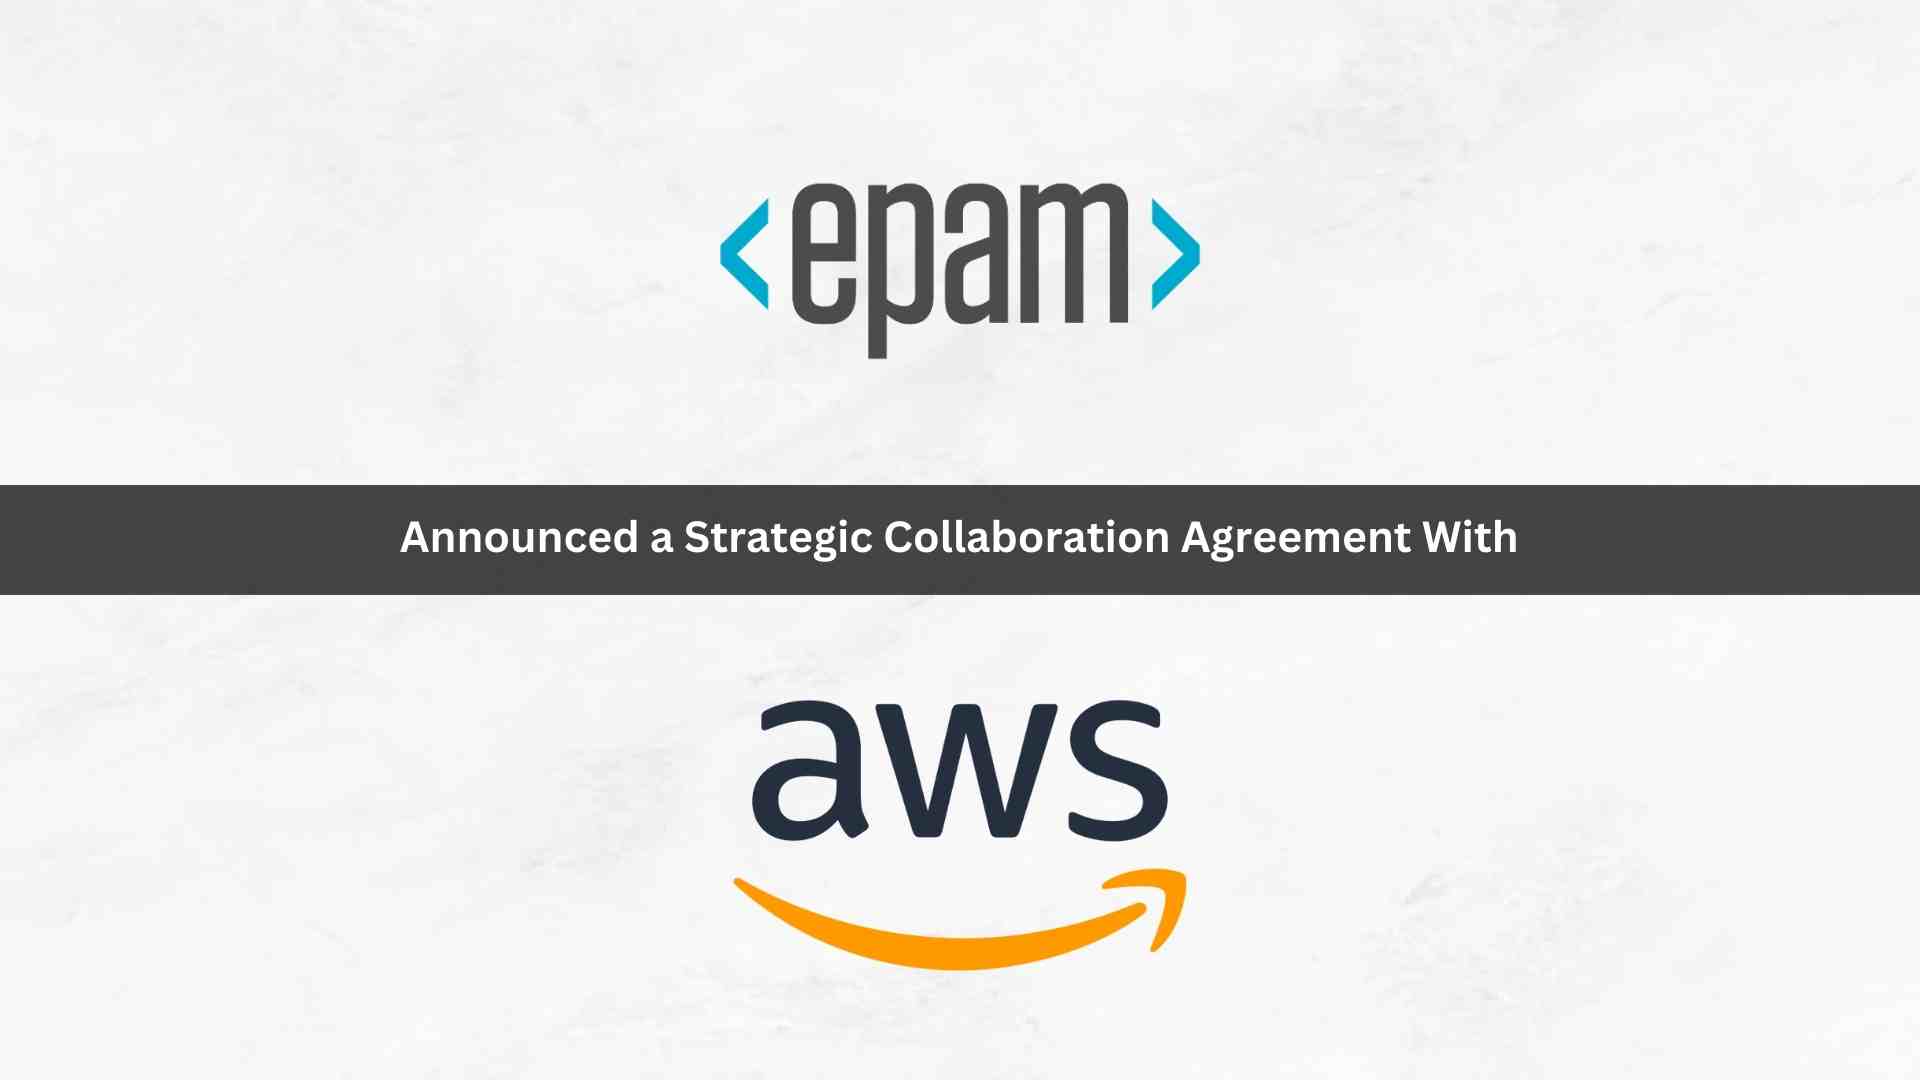 EPAM Signs Strategic Collaboration Agreement with AWS to Help Organizations Become Cloud-Native